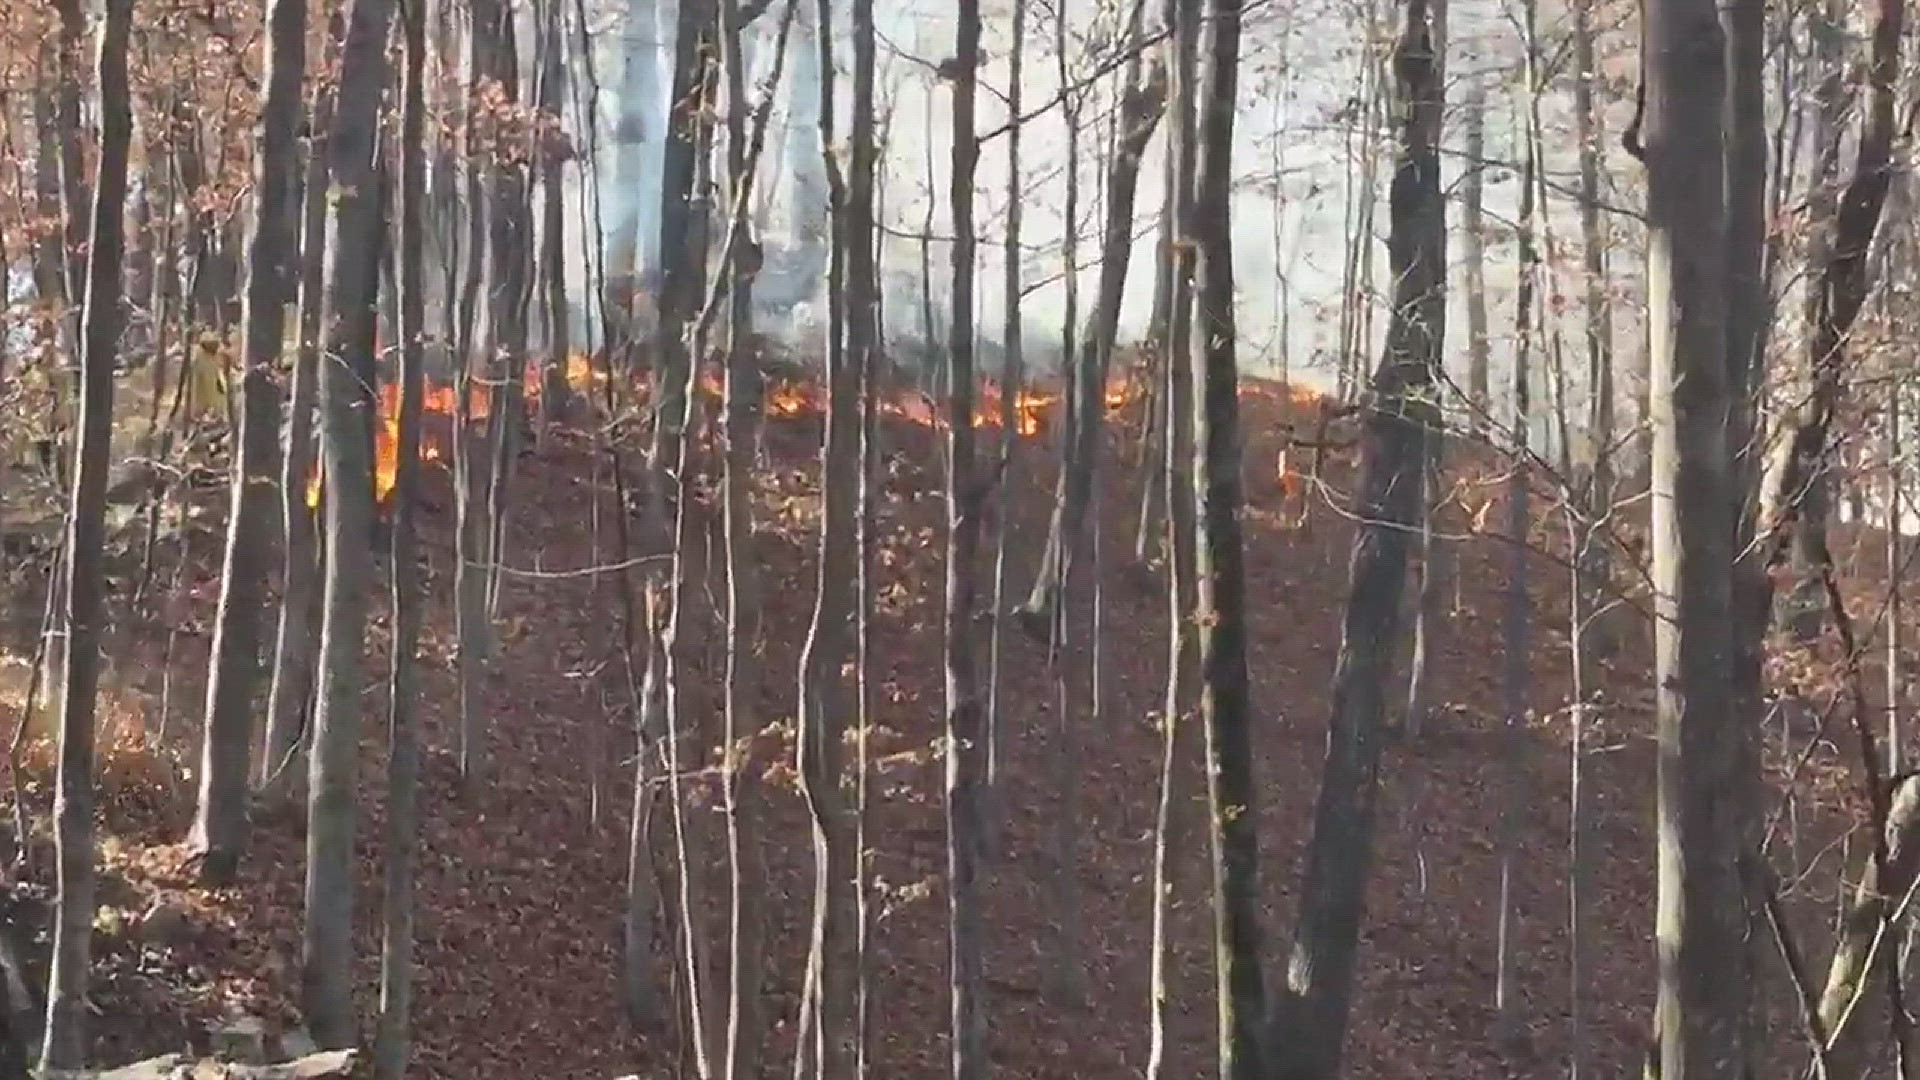 WBIR reporter Raishad Hardnett gives an update on the wildfire situation on Clinch Mountain. (11/18/16)